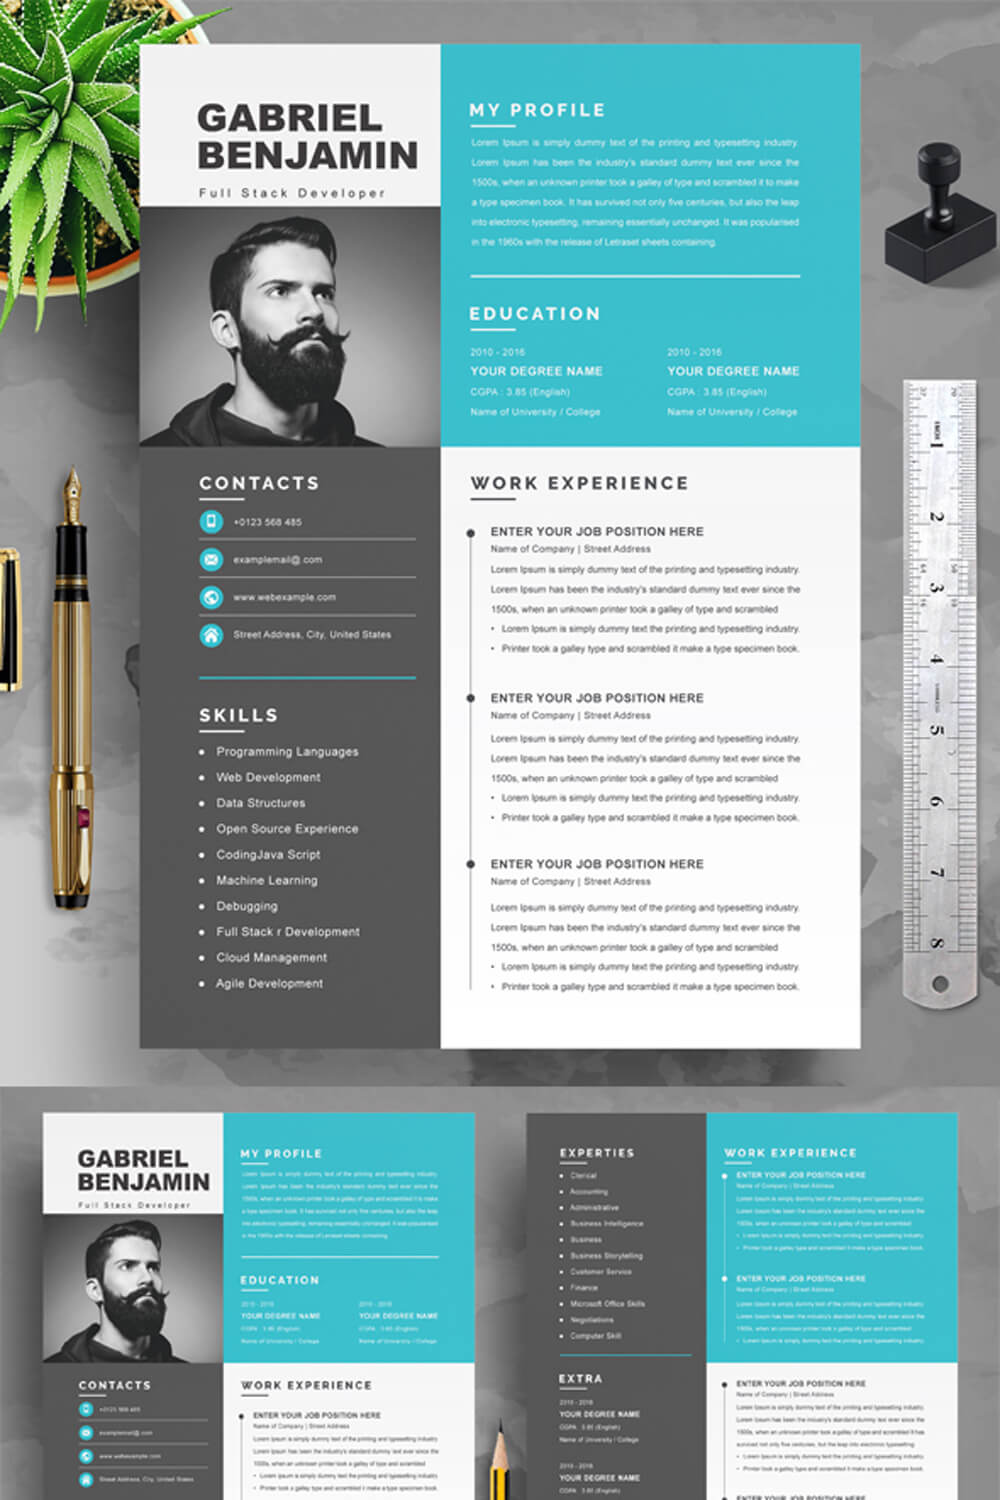 Full Stack Developer Resume Template | Professional Resume Template in Word & PSD Format pinterest preview image.